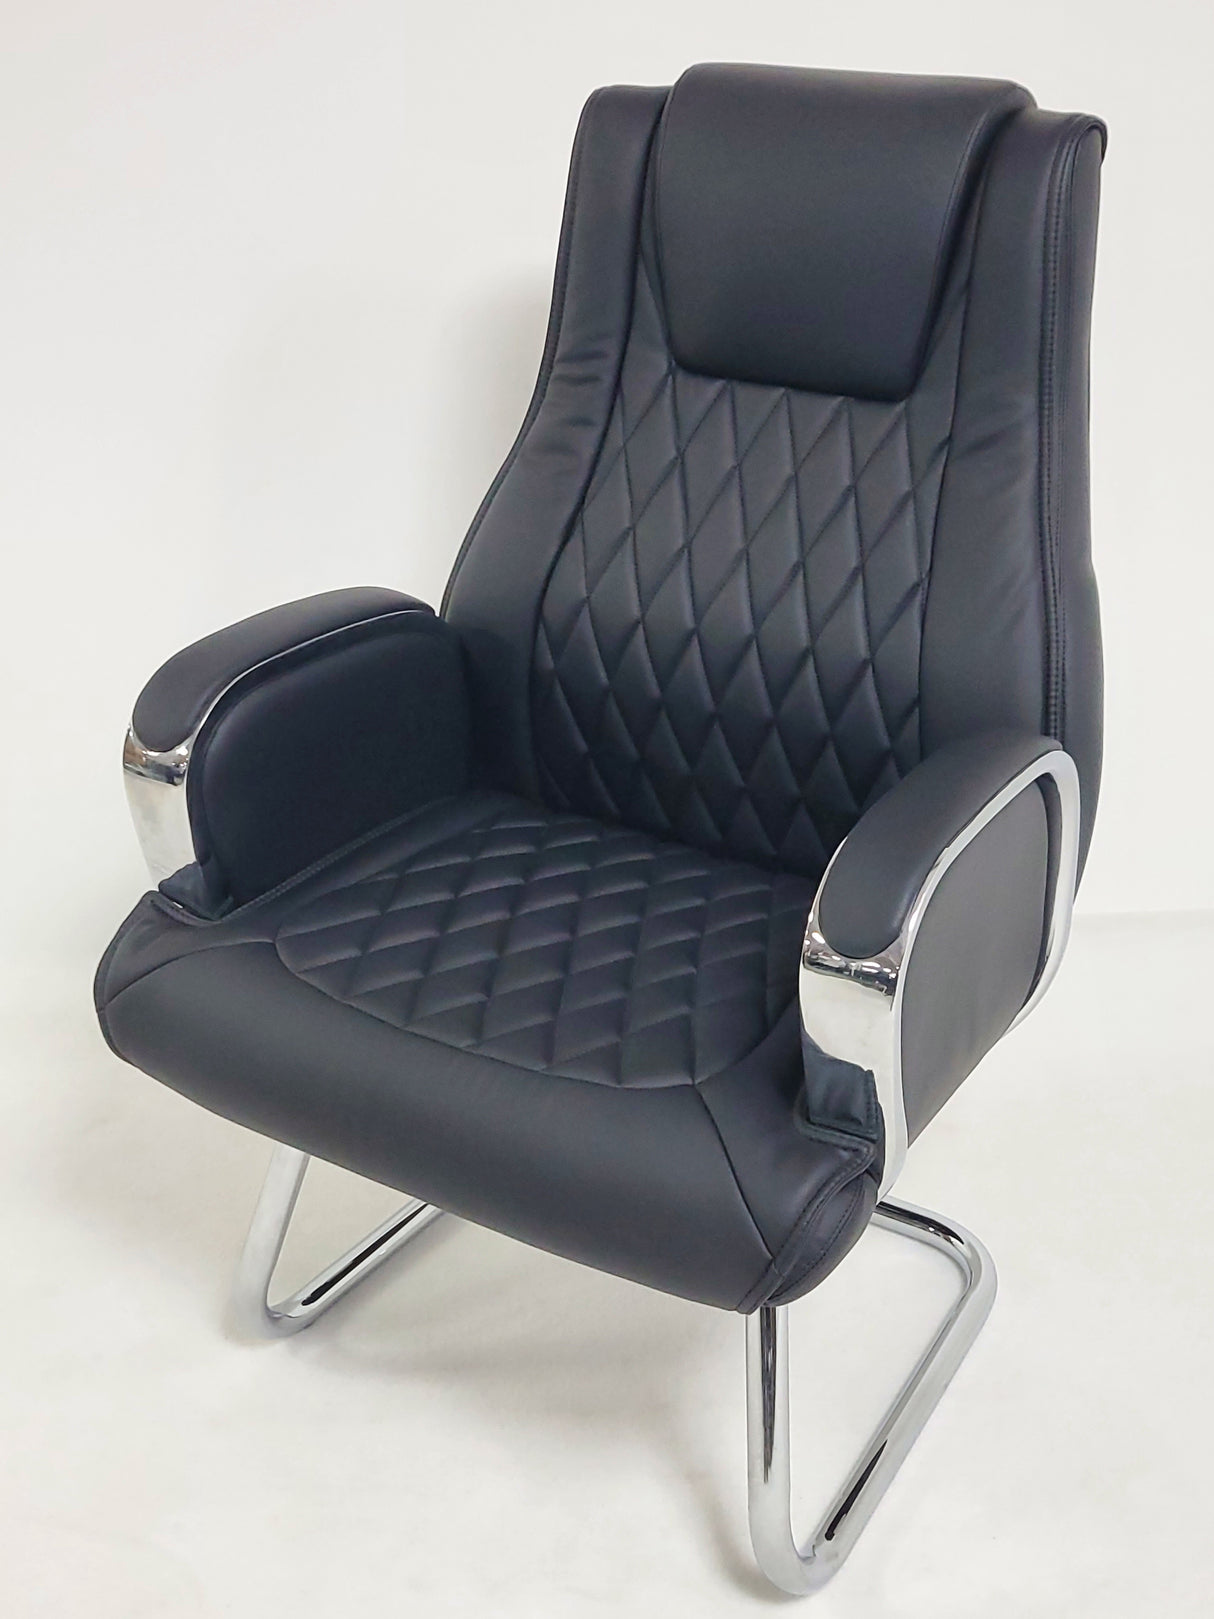 Heavy Duty Modern Black Leather Visitor Chair with Chrome Arms - CHA-1202C